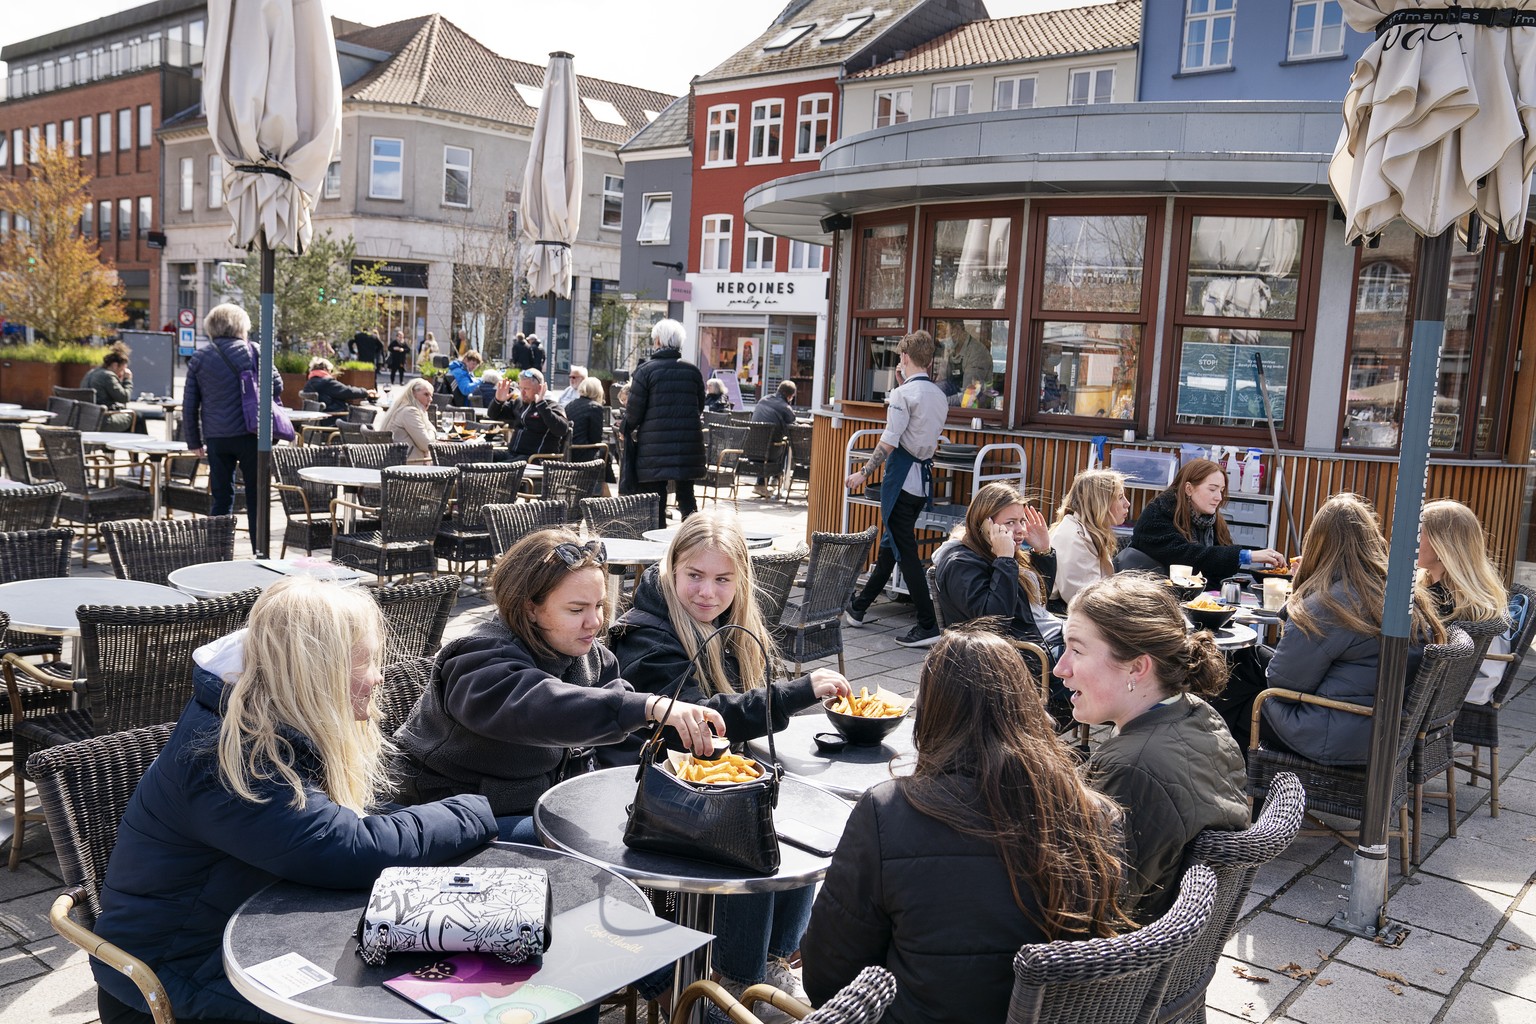 FILE - In this Wednesday April 21, 2021 file photo, people sit outside a restaurant for outdoor service in Roskilde Denmark, as cafes and bars reopened. After 548 days with restrictions to limit the s ...